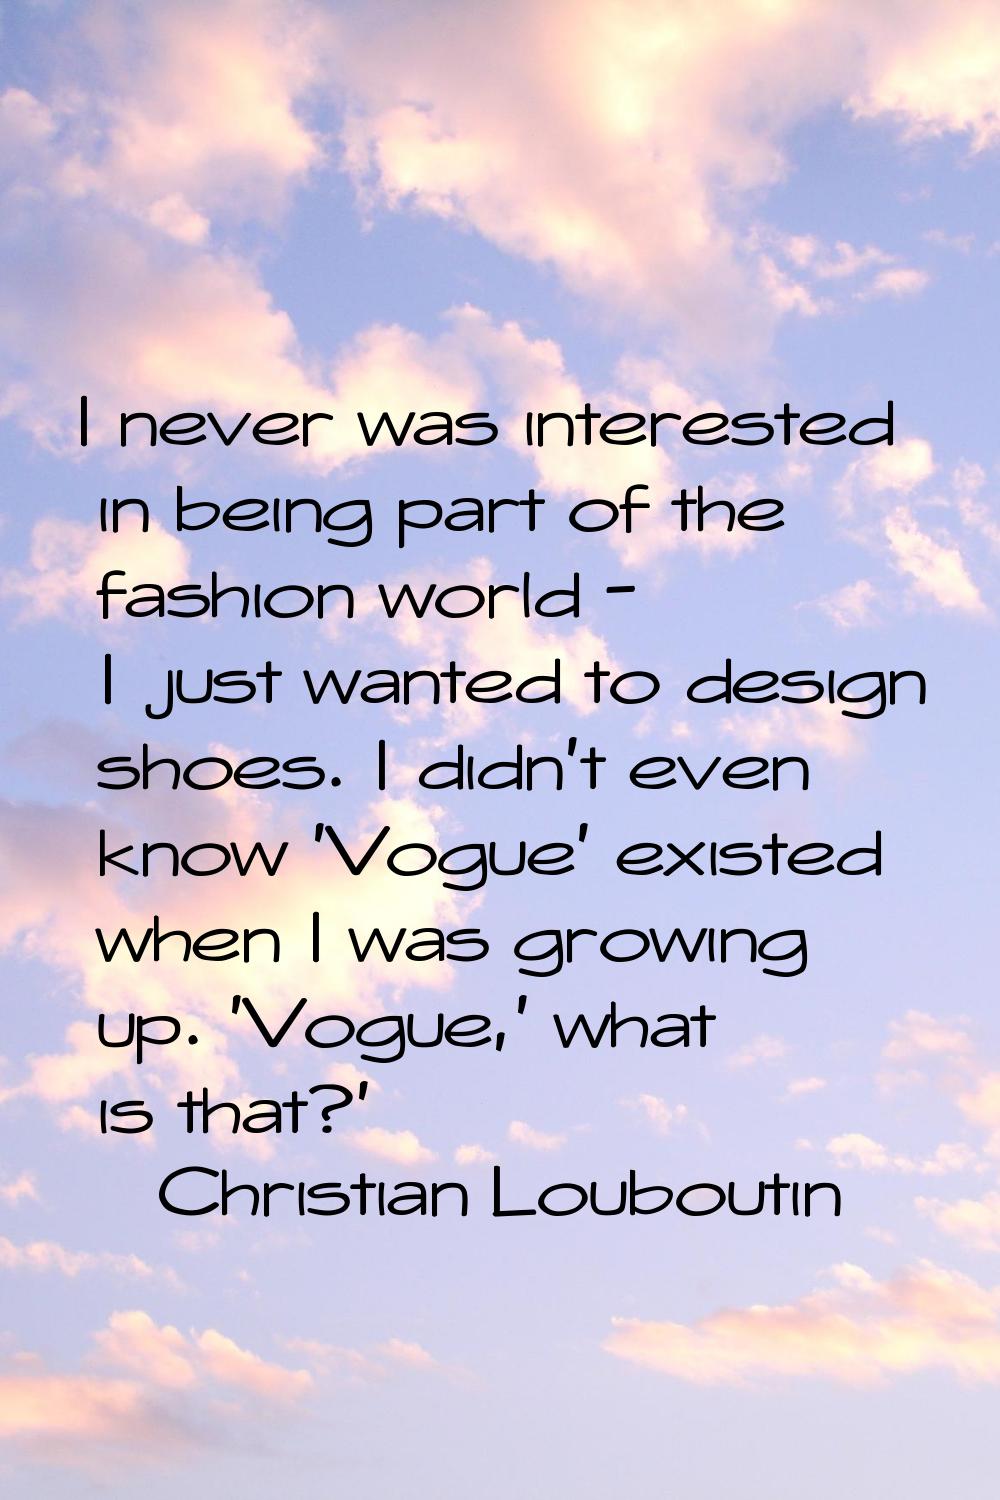 I never was interested in being part of the fashion world - I just wanted to design shoes. I didn't